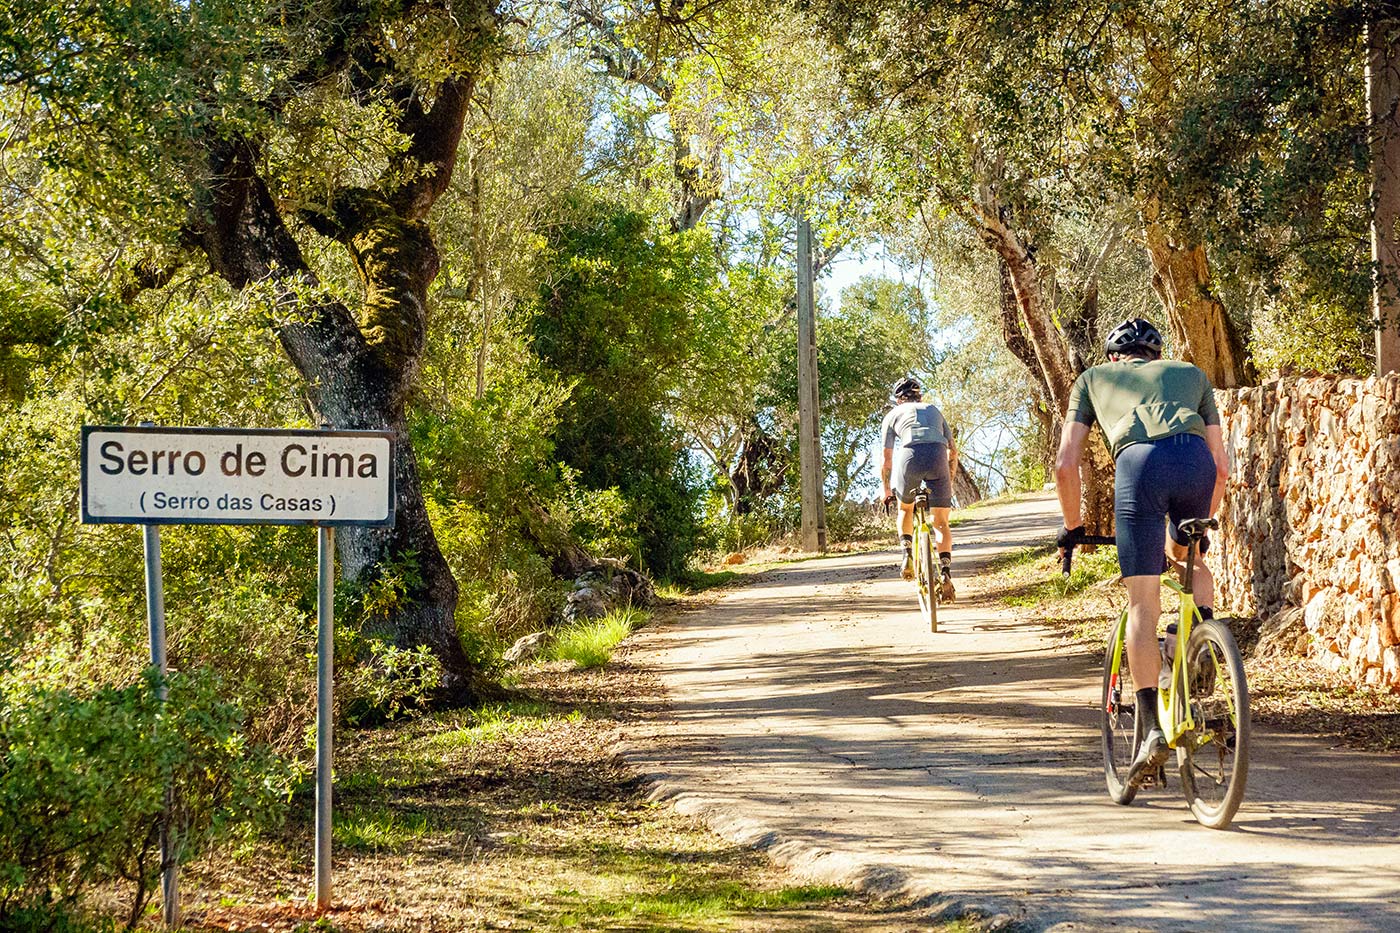 riding bikes through olive trees and villages in portugal